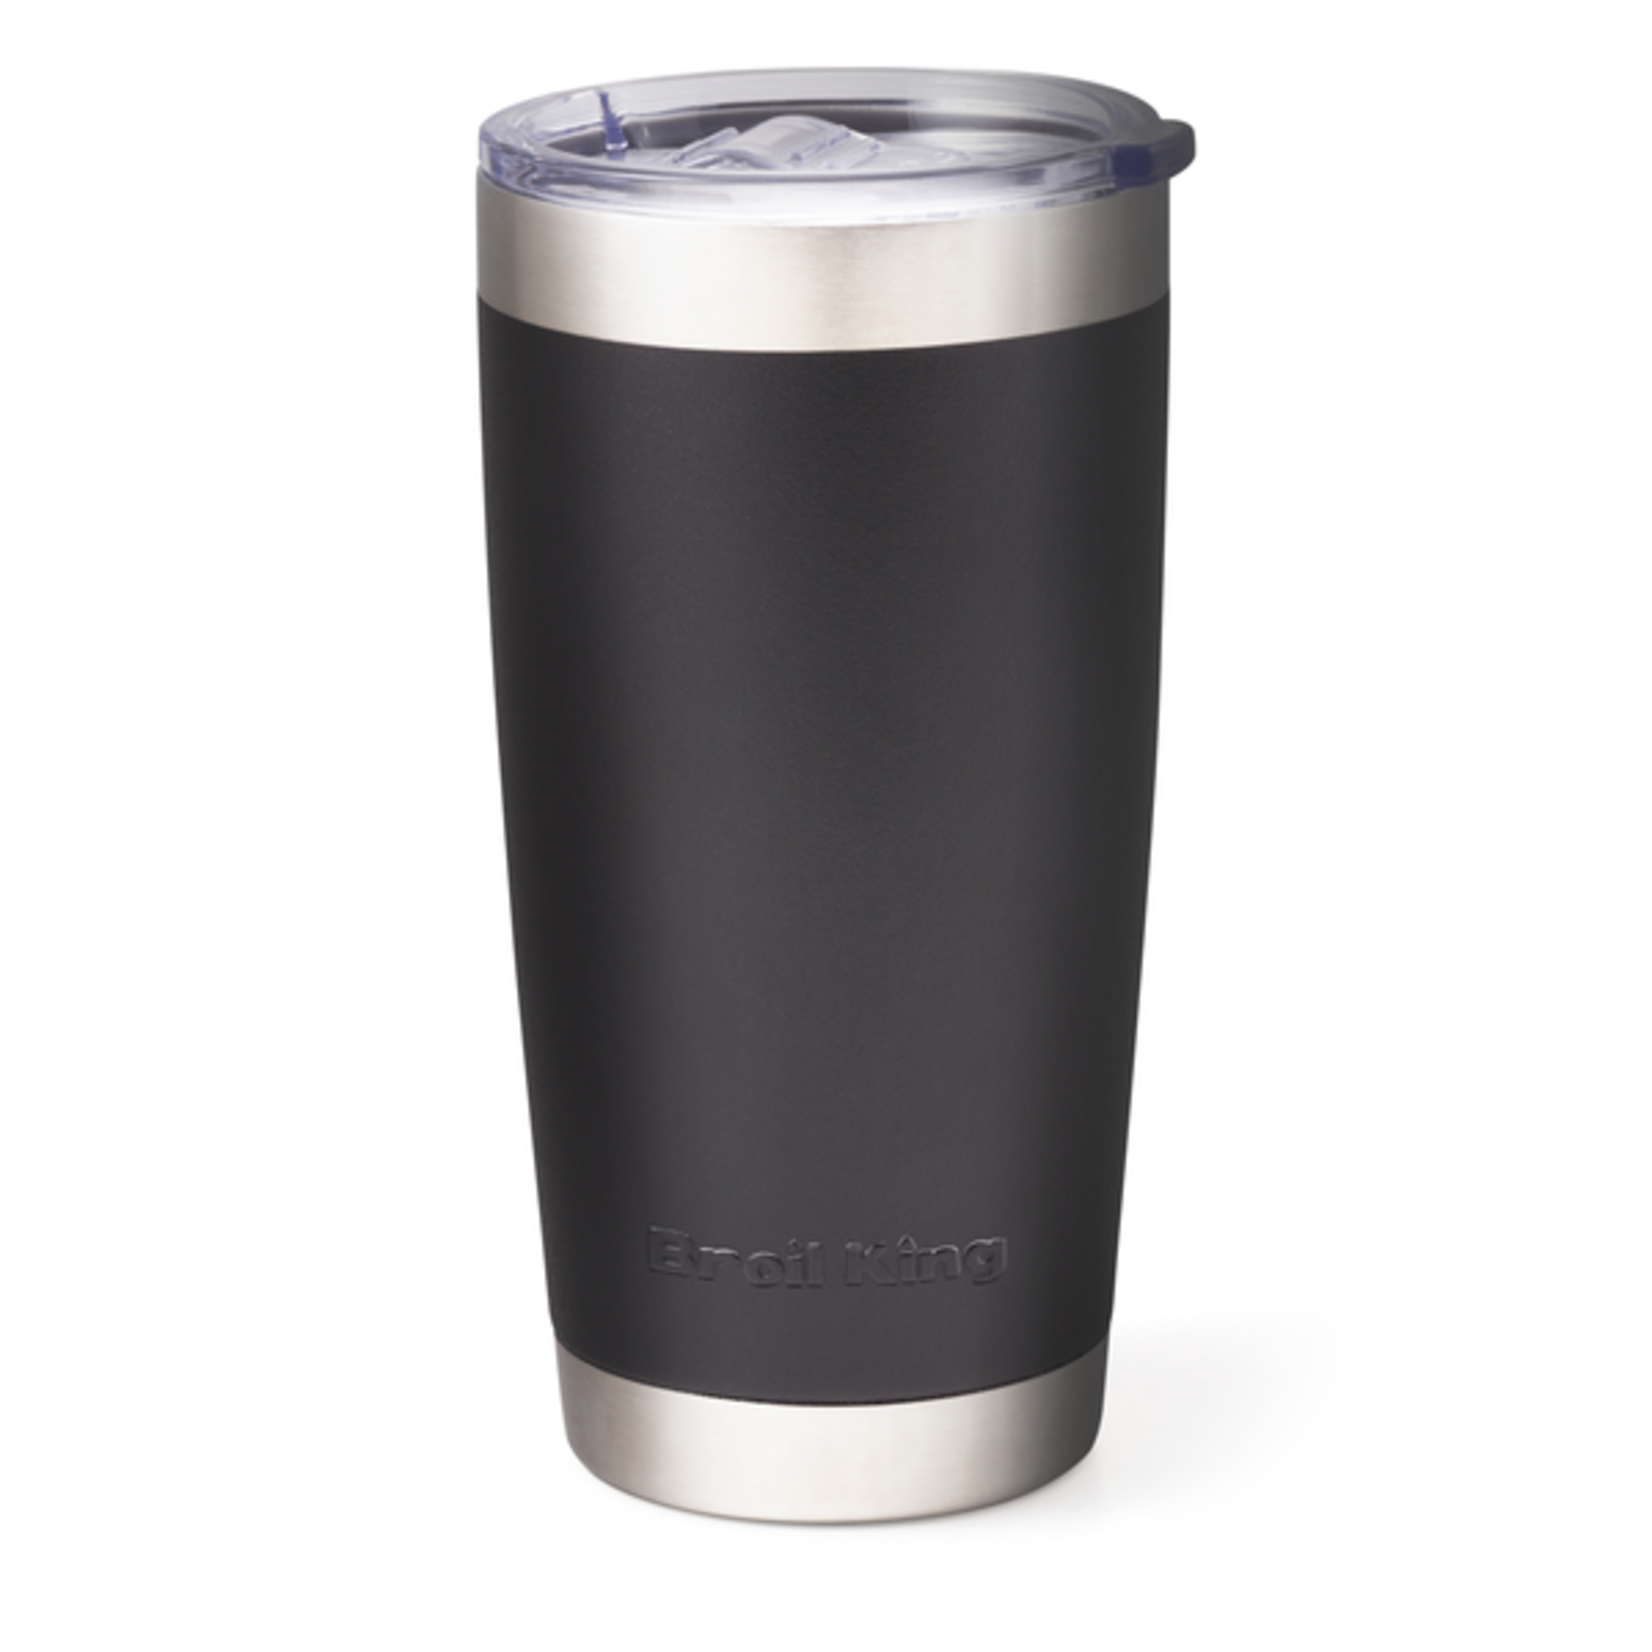 Broil King Tumbler - SS & Coated